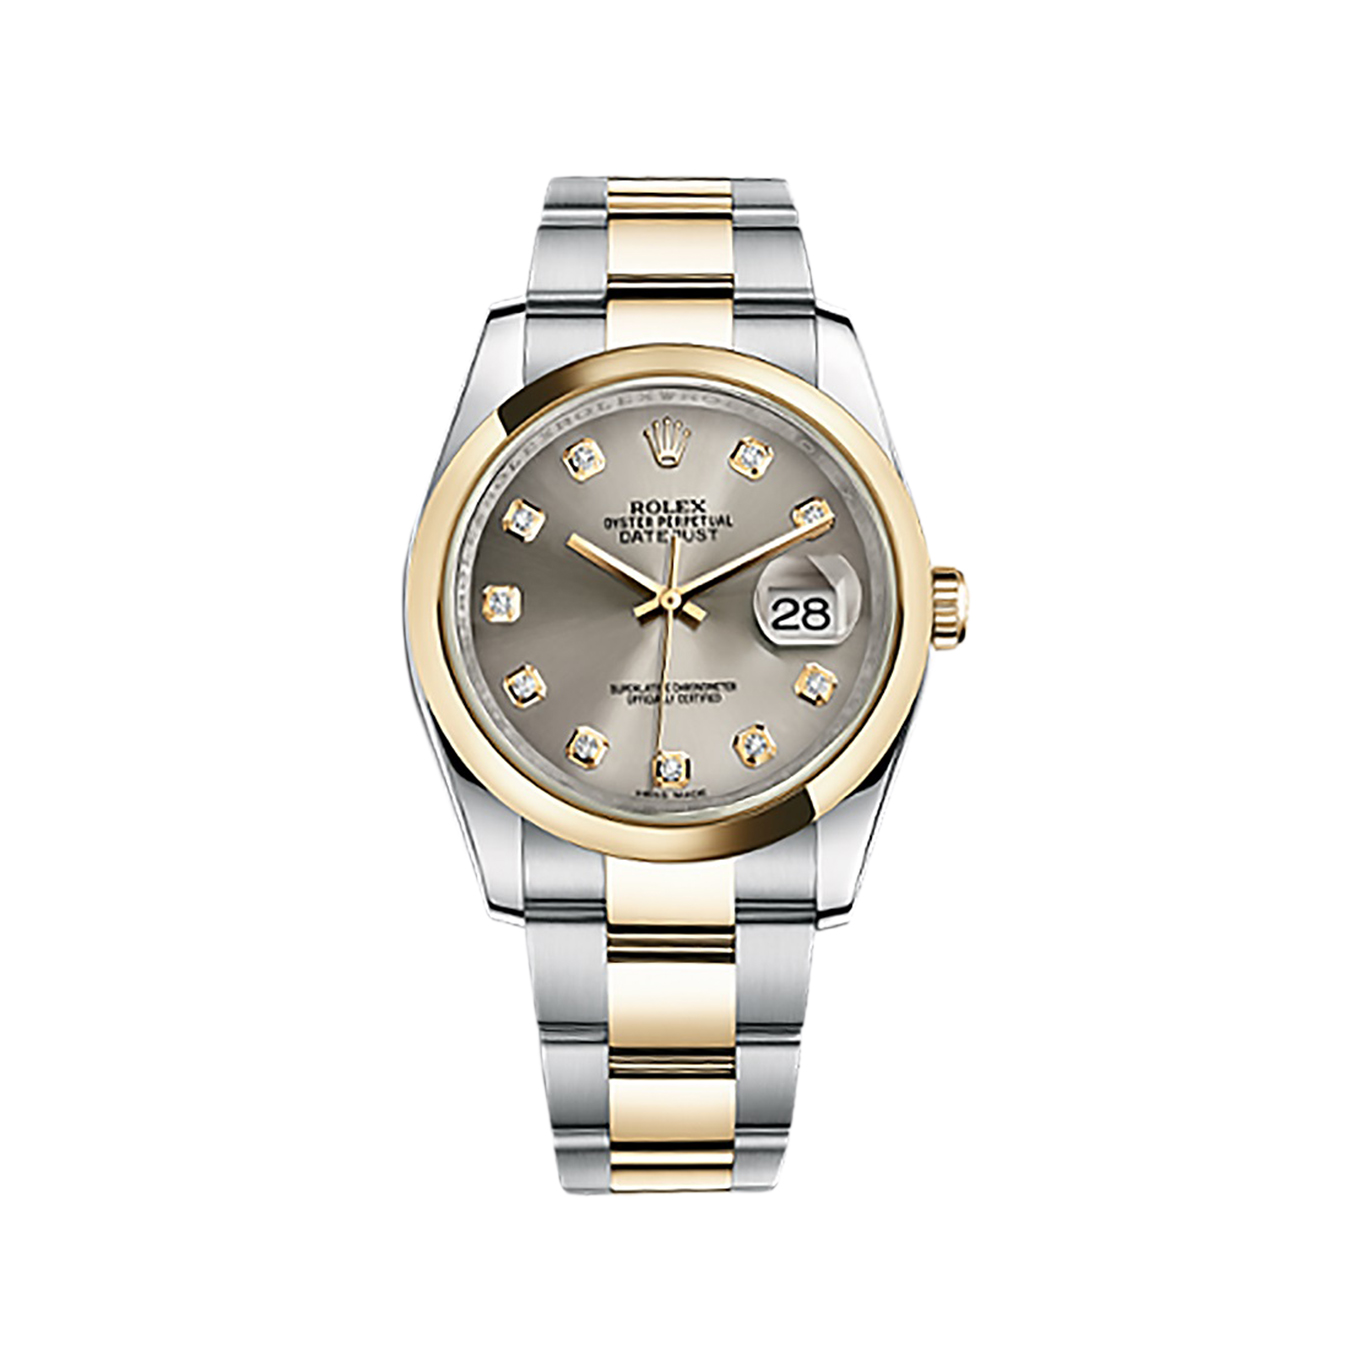 Datejust 36 116203 Gold & Stainless Steel Watch (Steel Set with Diamonds)